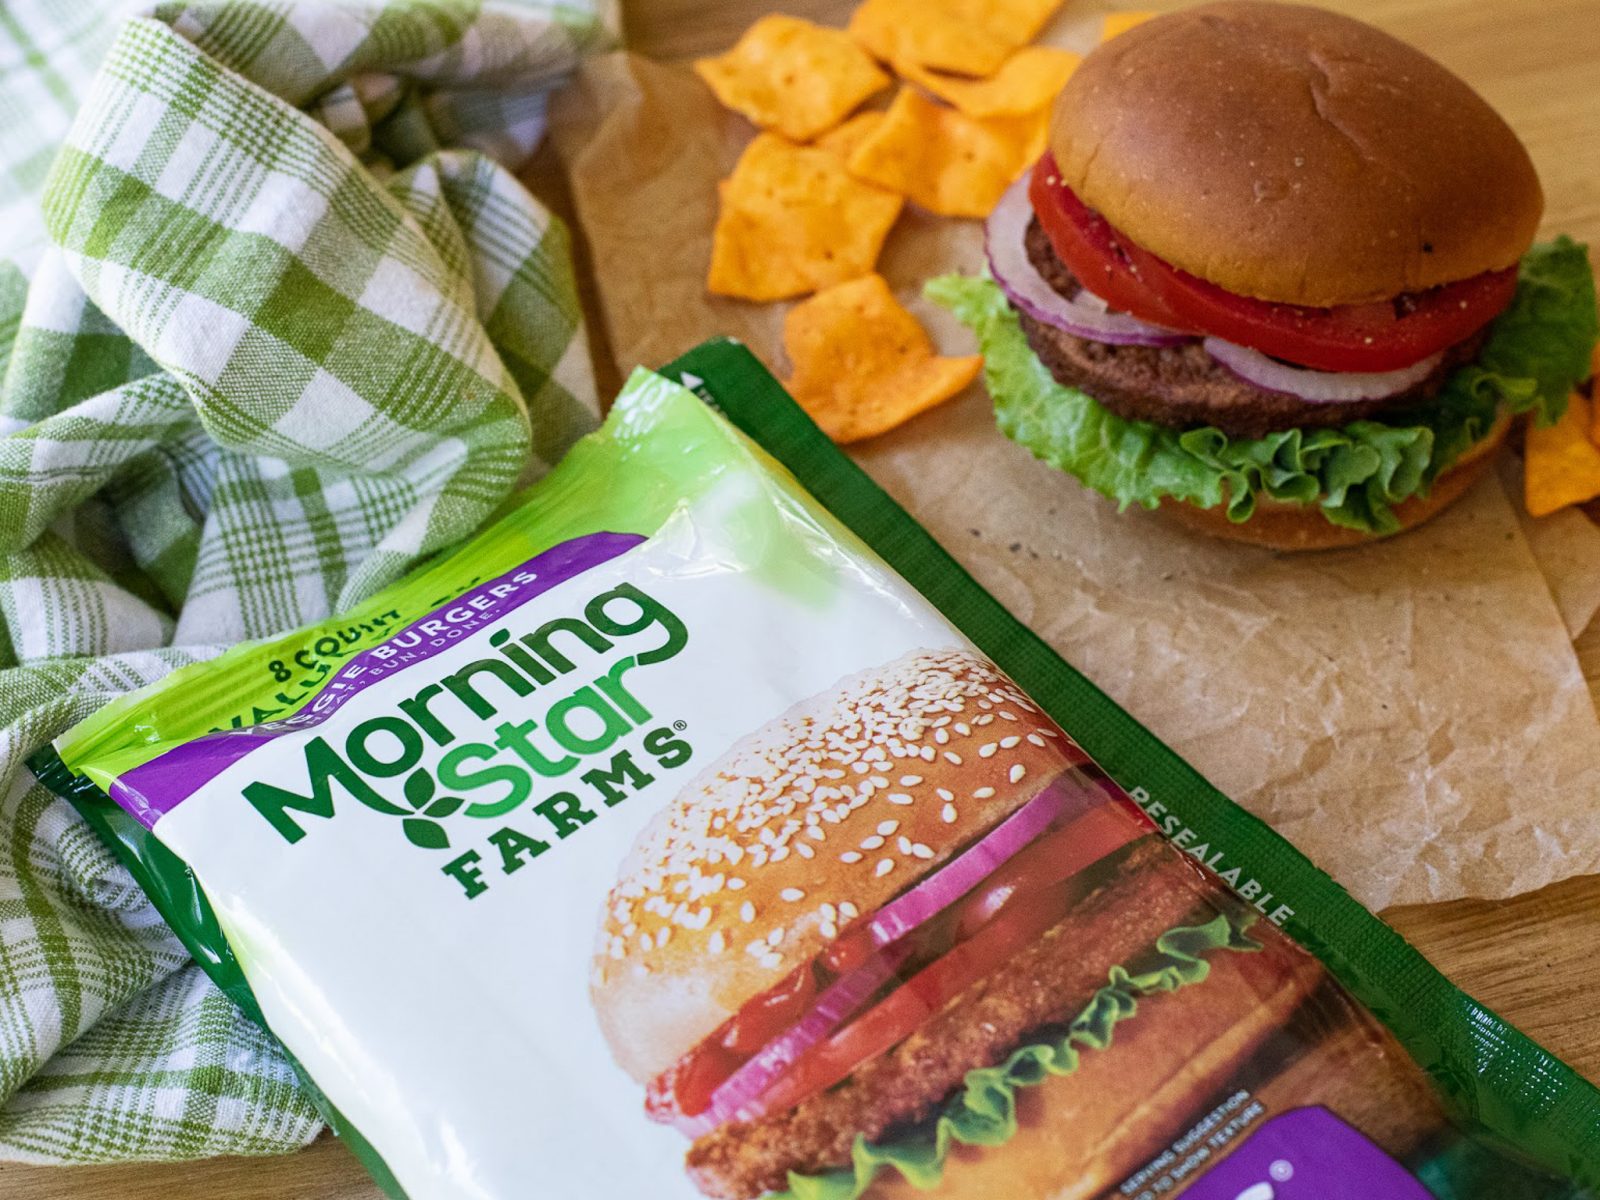 MorningStar Fams Deal At Publix – Pay Just 79¢ For A Breakfast Item AND Burgers!